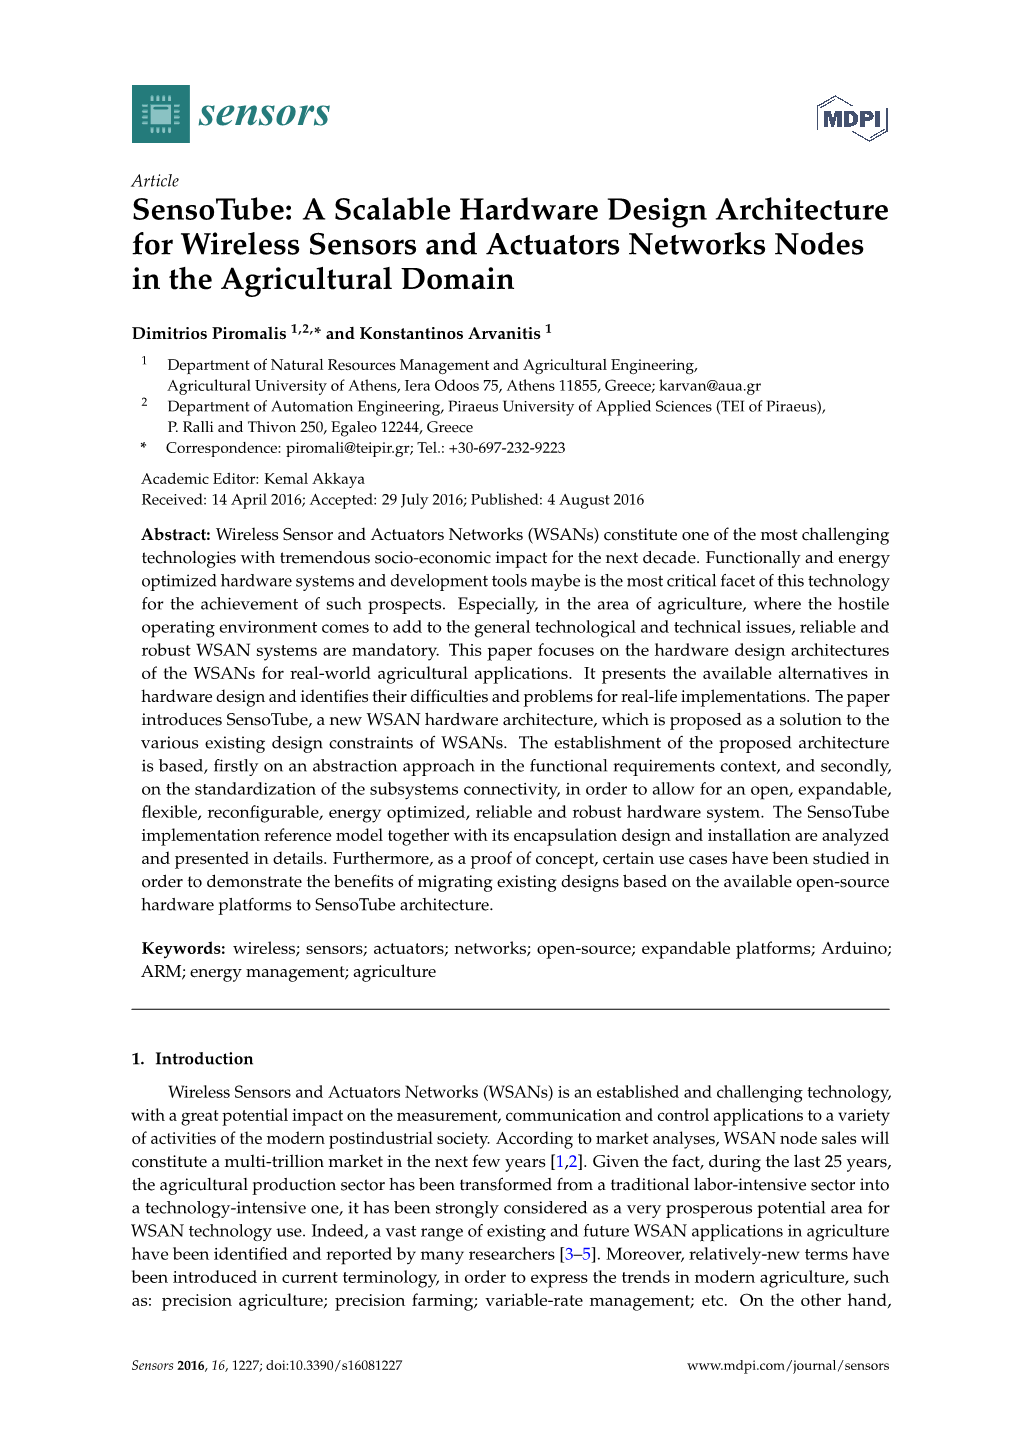 Sensotube: a Scalable Hardware Design Architecture for Wireless Sensors and Actuators Networks Nodes in the Agricultural Domain